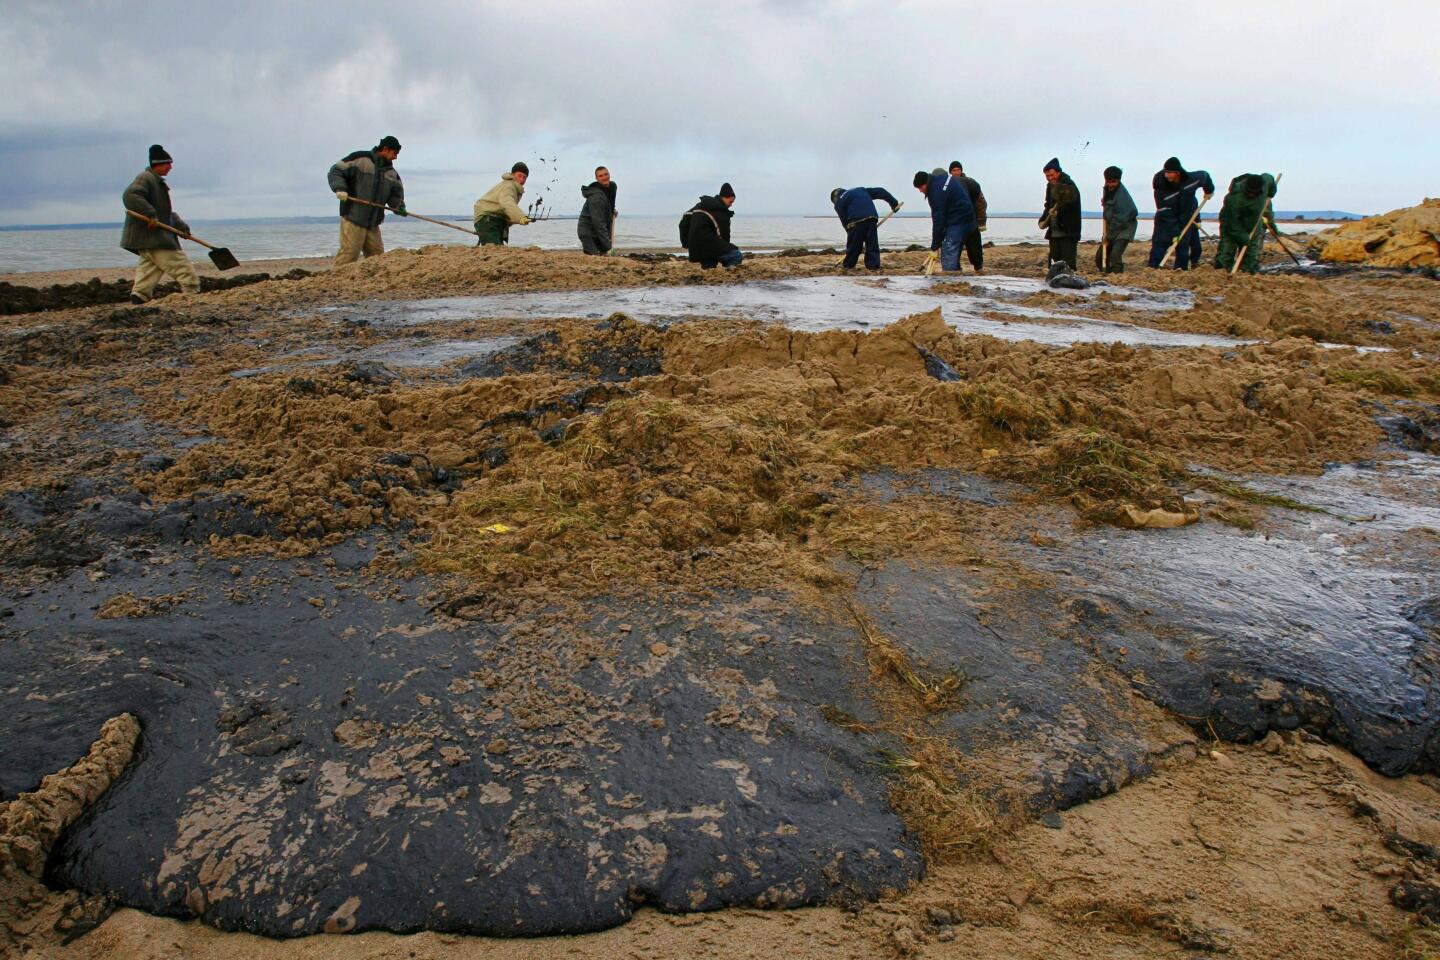 Workers labor to remove oil from the beach on Russia's Tuzla Spit after a tanker accident last weekend when a storm hit in the area of the Kerch Strait between the Black Sea and the Sea of Azov. "All of our problems are because of this oil," vineyard worker Alexander Ostapenko, 43, told The Times. "But what's in it for us? They are polluting our sea and land."